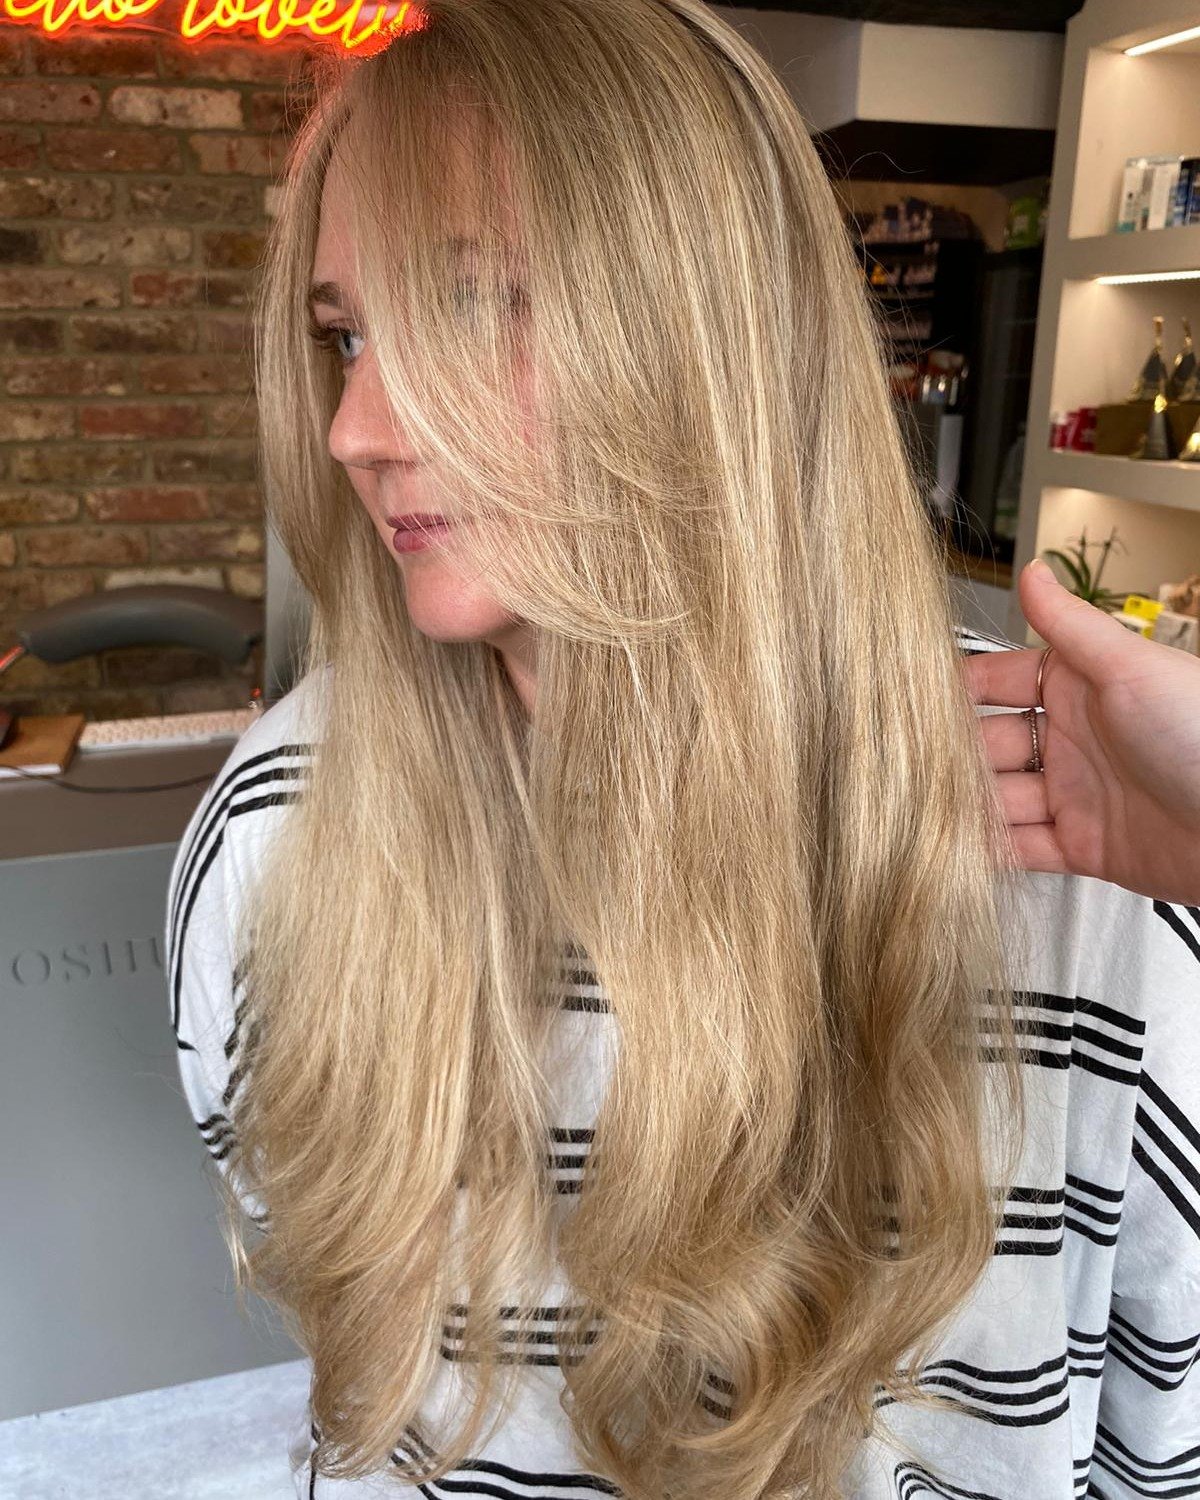 Kissed by the sun 🌞💋

Full head highlights, toner, cut and style using our favourites - @wella and @sebastianpro_official 🫶

Swipe for the before!
📸 @hairbymadisonmear_ 

Book now: 📞 01903 205721

.
.
.

#worthing #westsussex #sussex #hair #hair